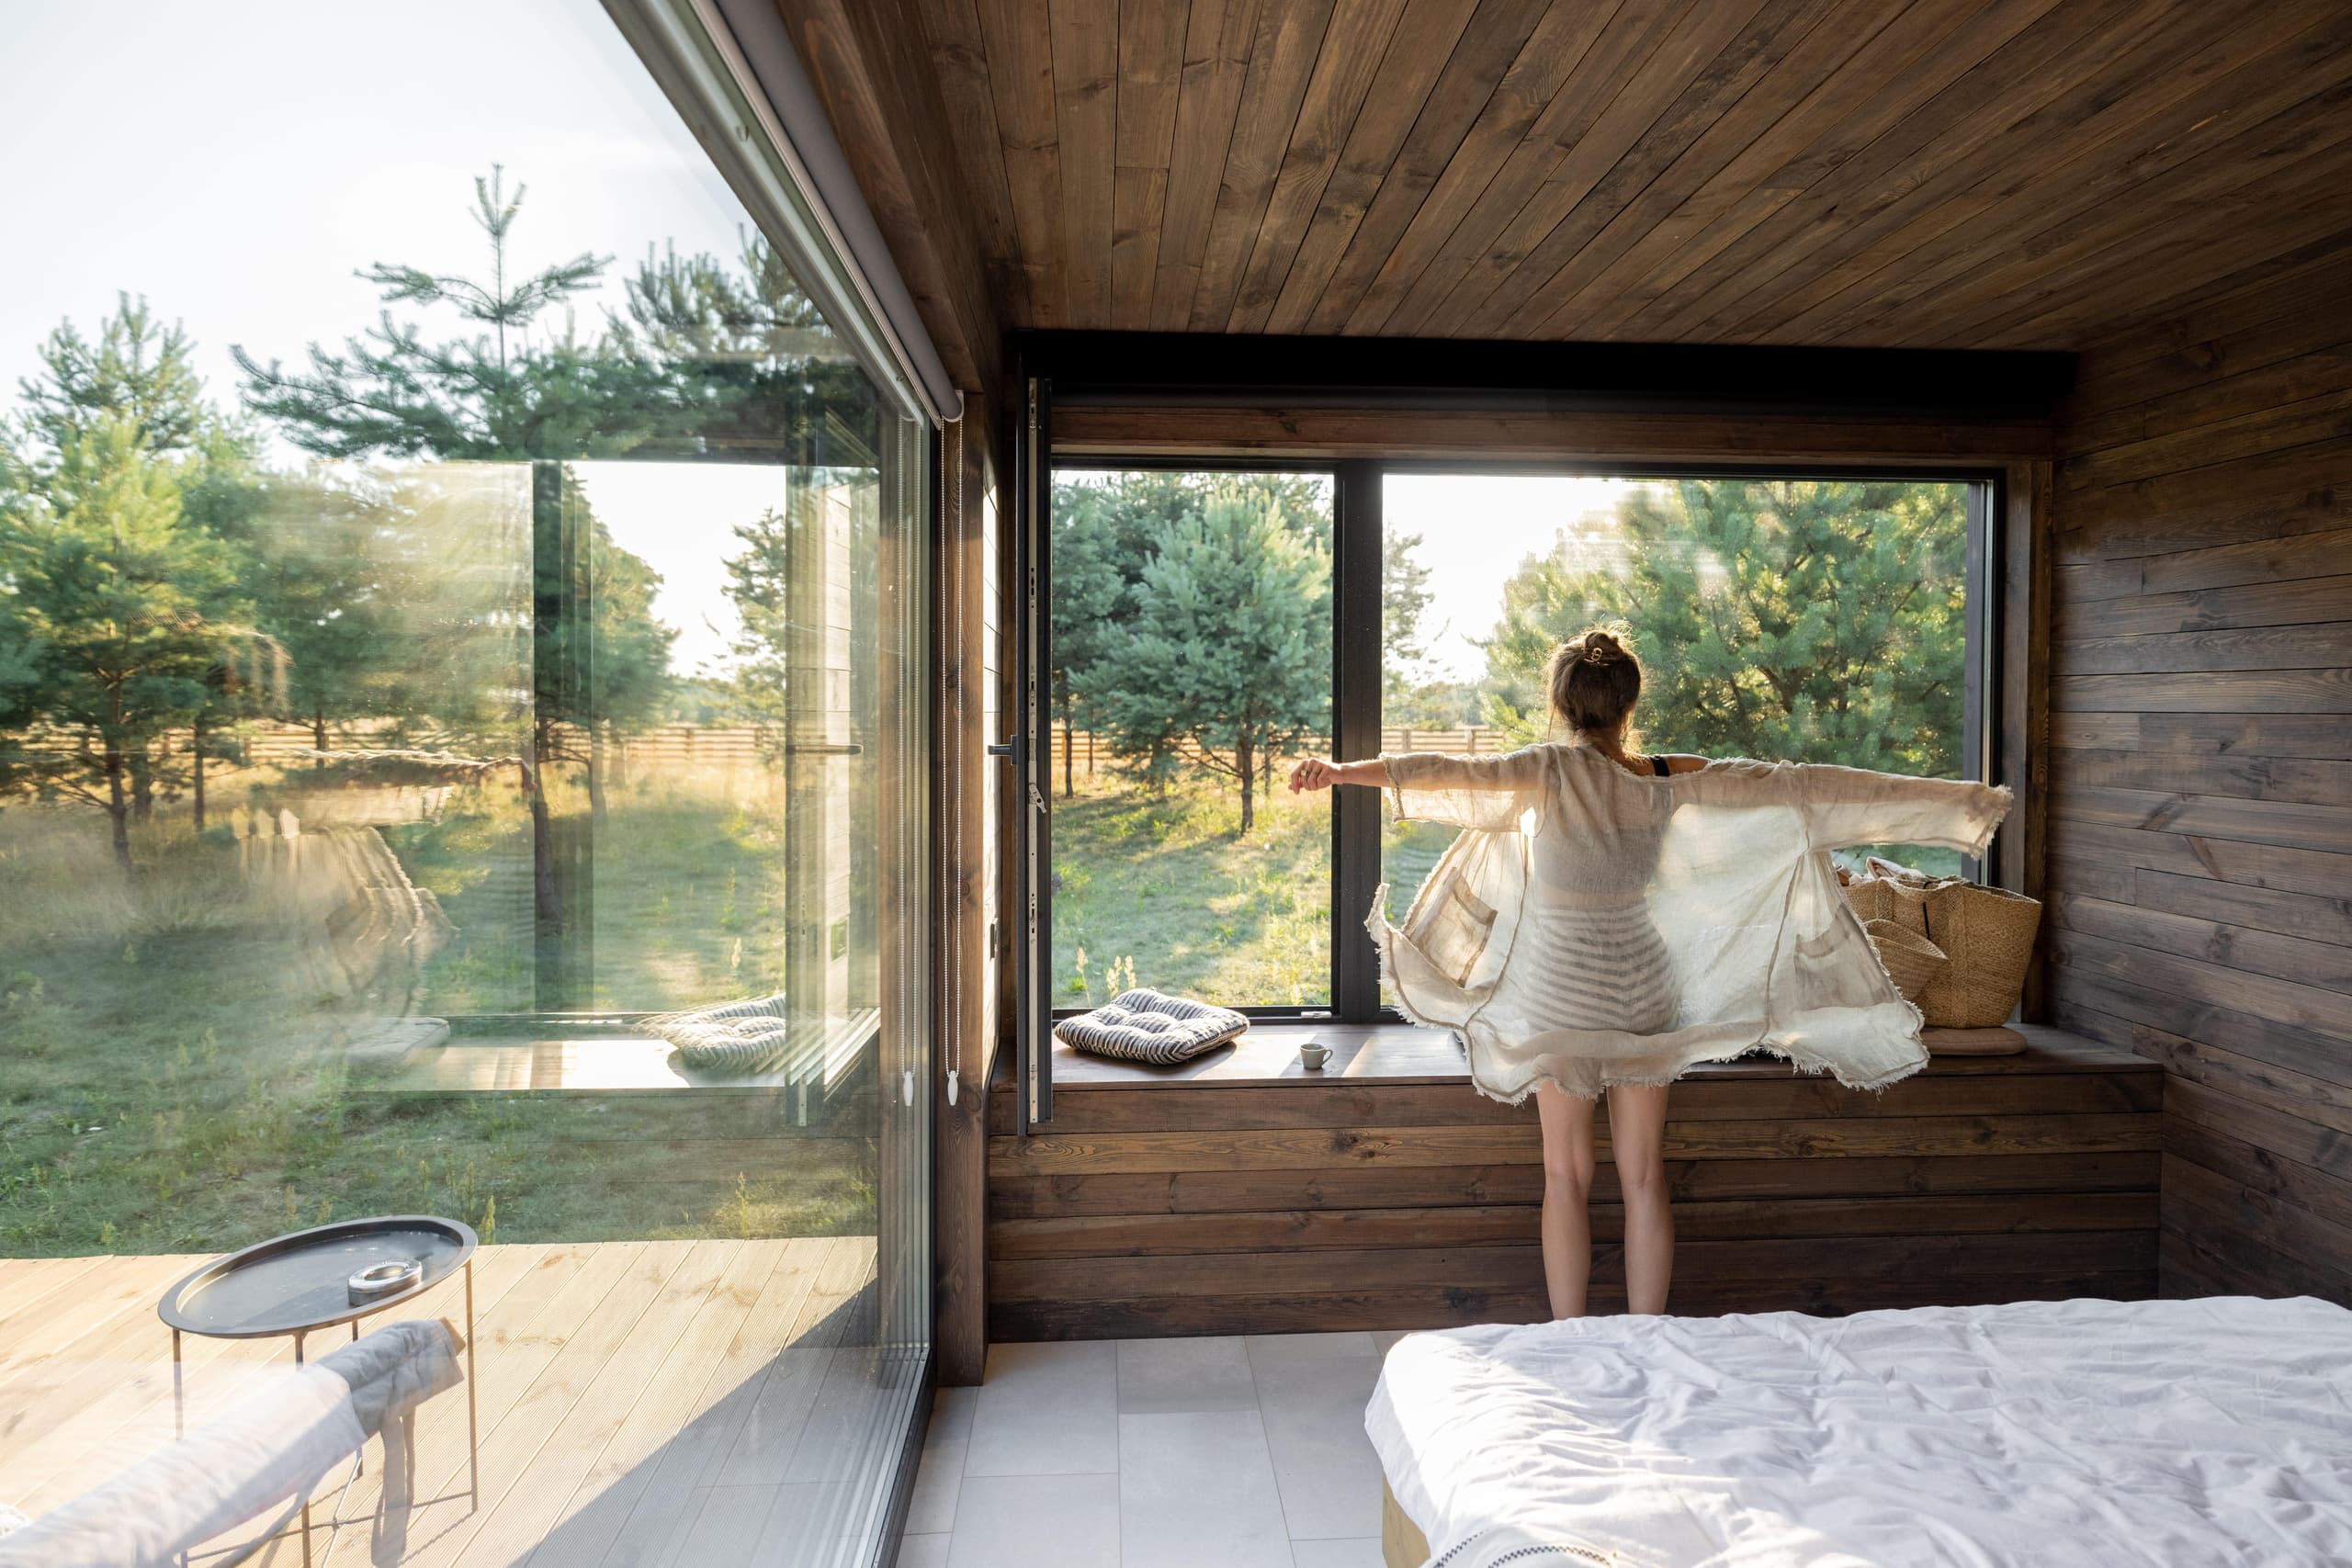 woman-wakes-up-at-country-house-in-nature-2021-09-04-12-16-08-utc-min.jpg